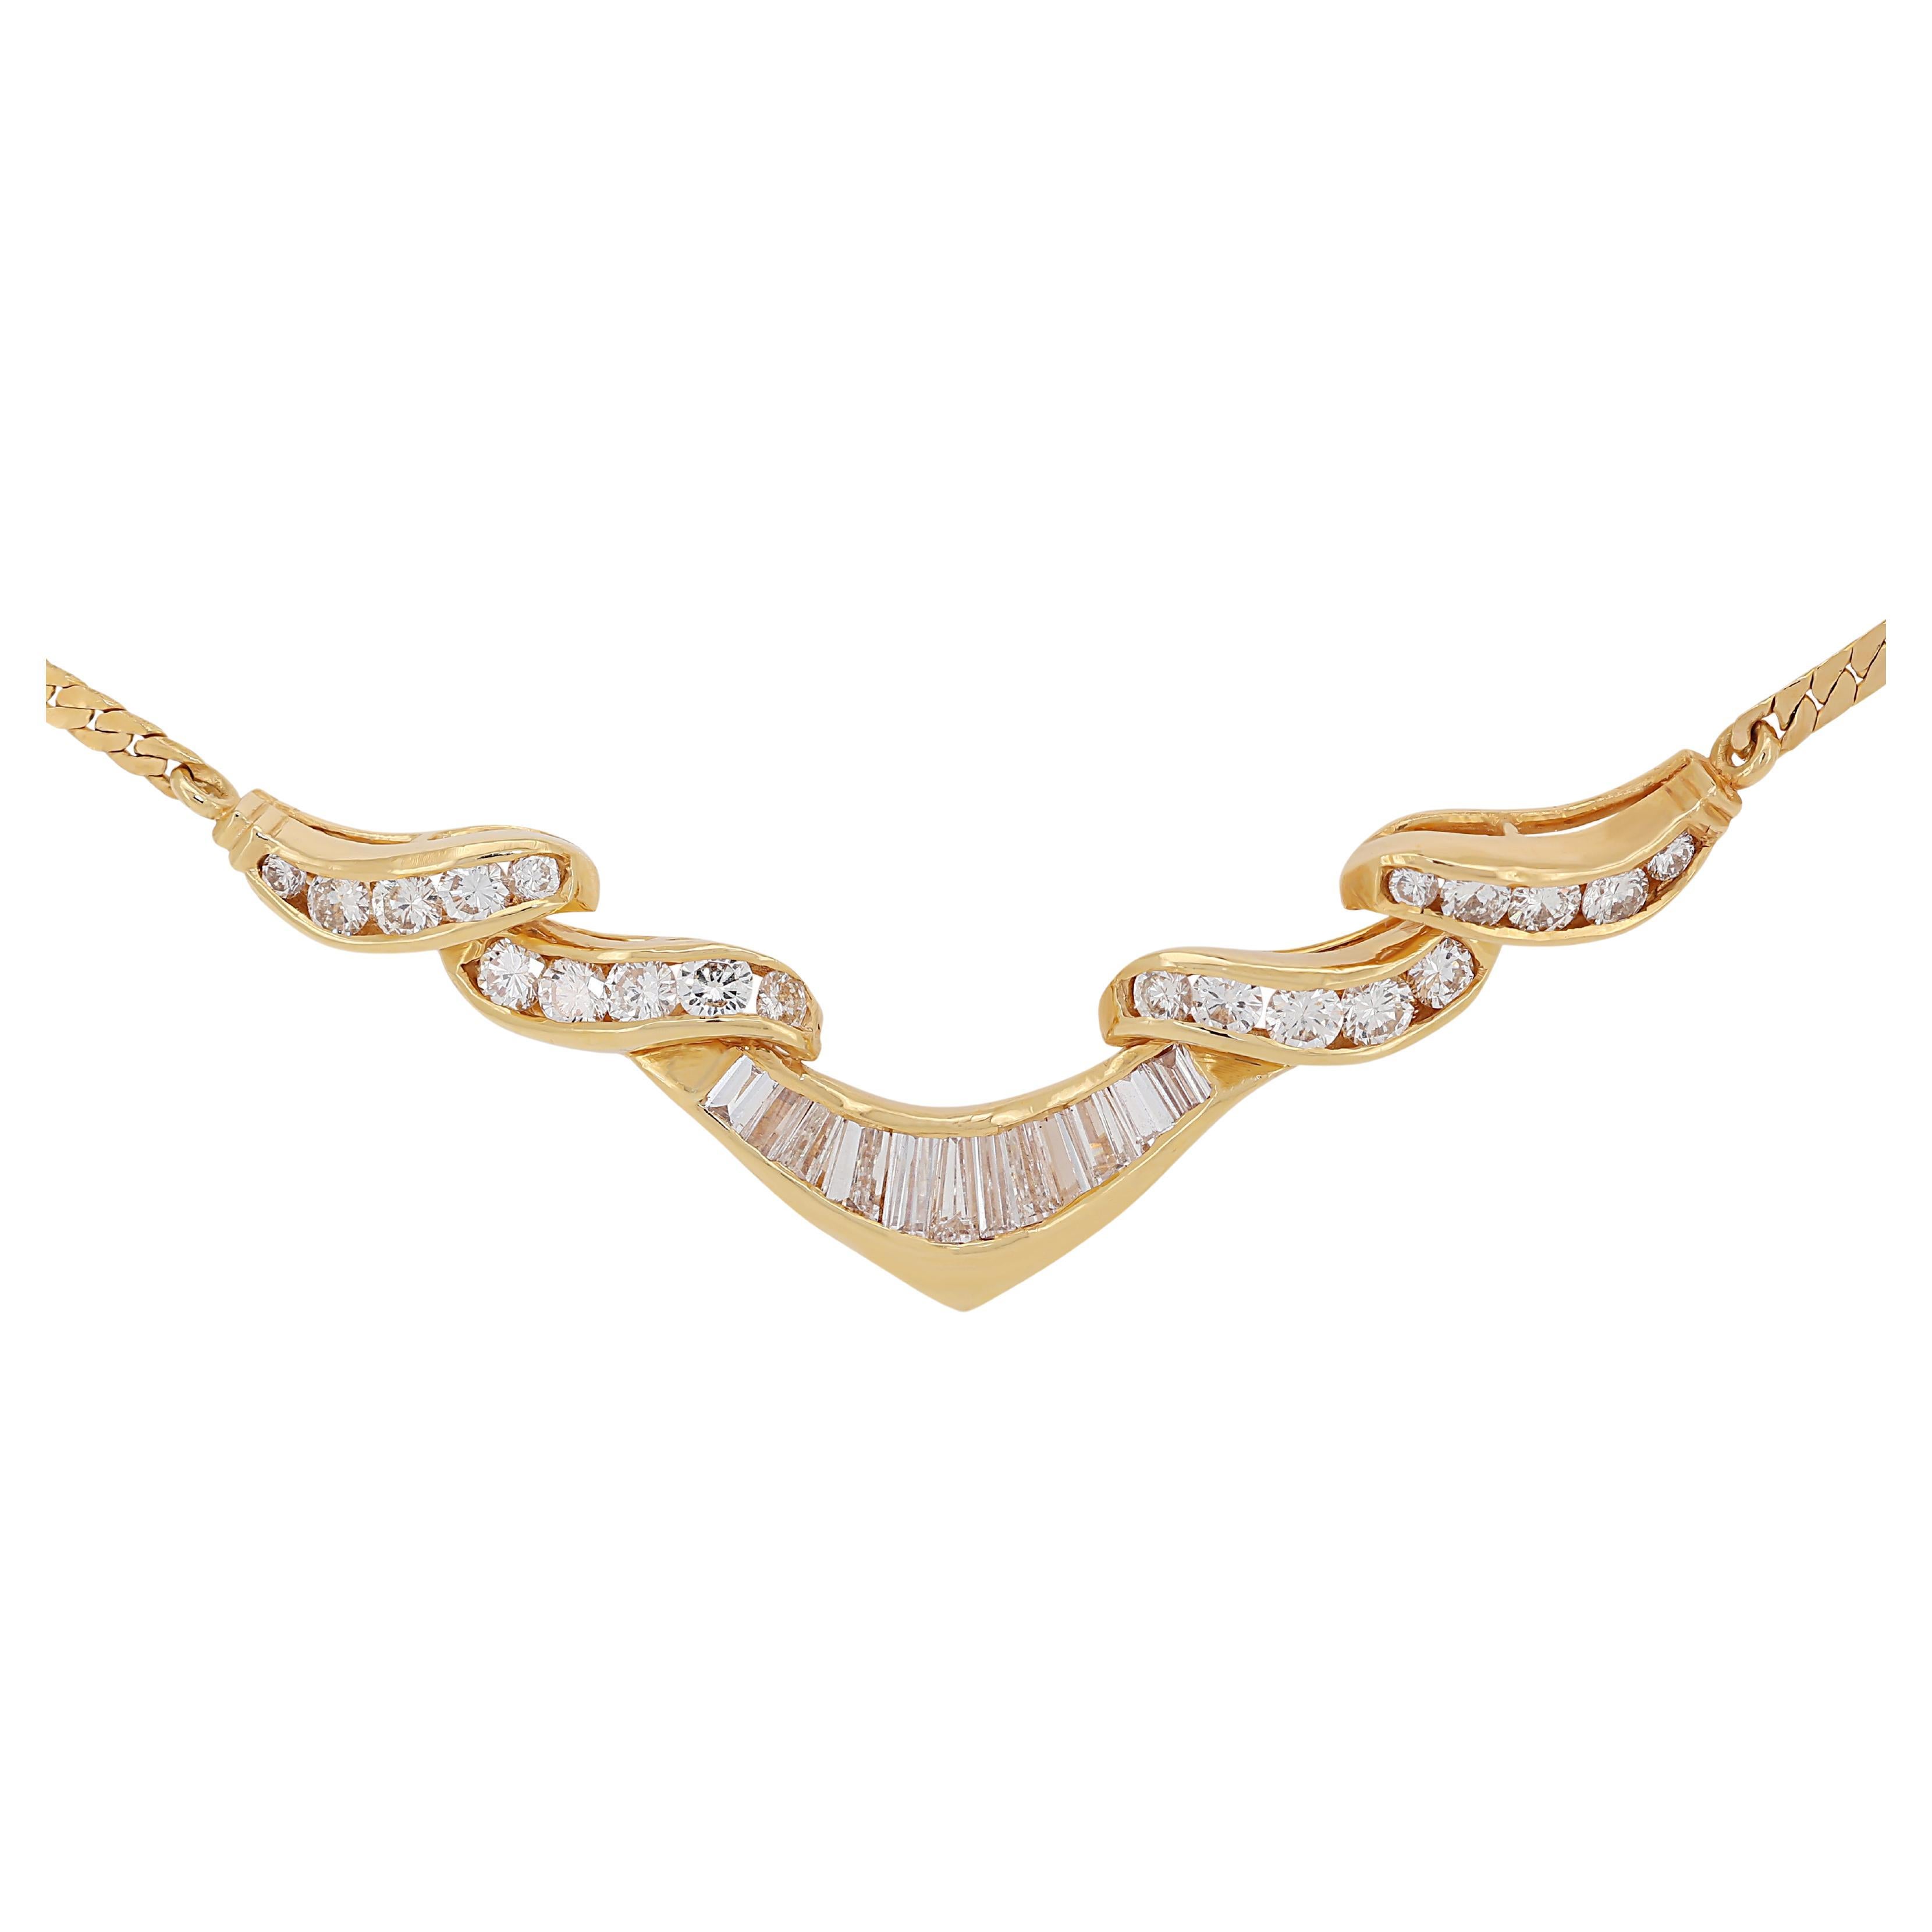 Fabulous 1.18ct Diamond Collar Necklace in 20K Yellow Gold For Sale